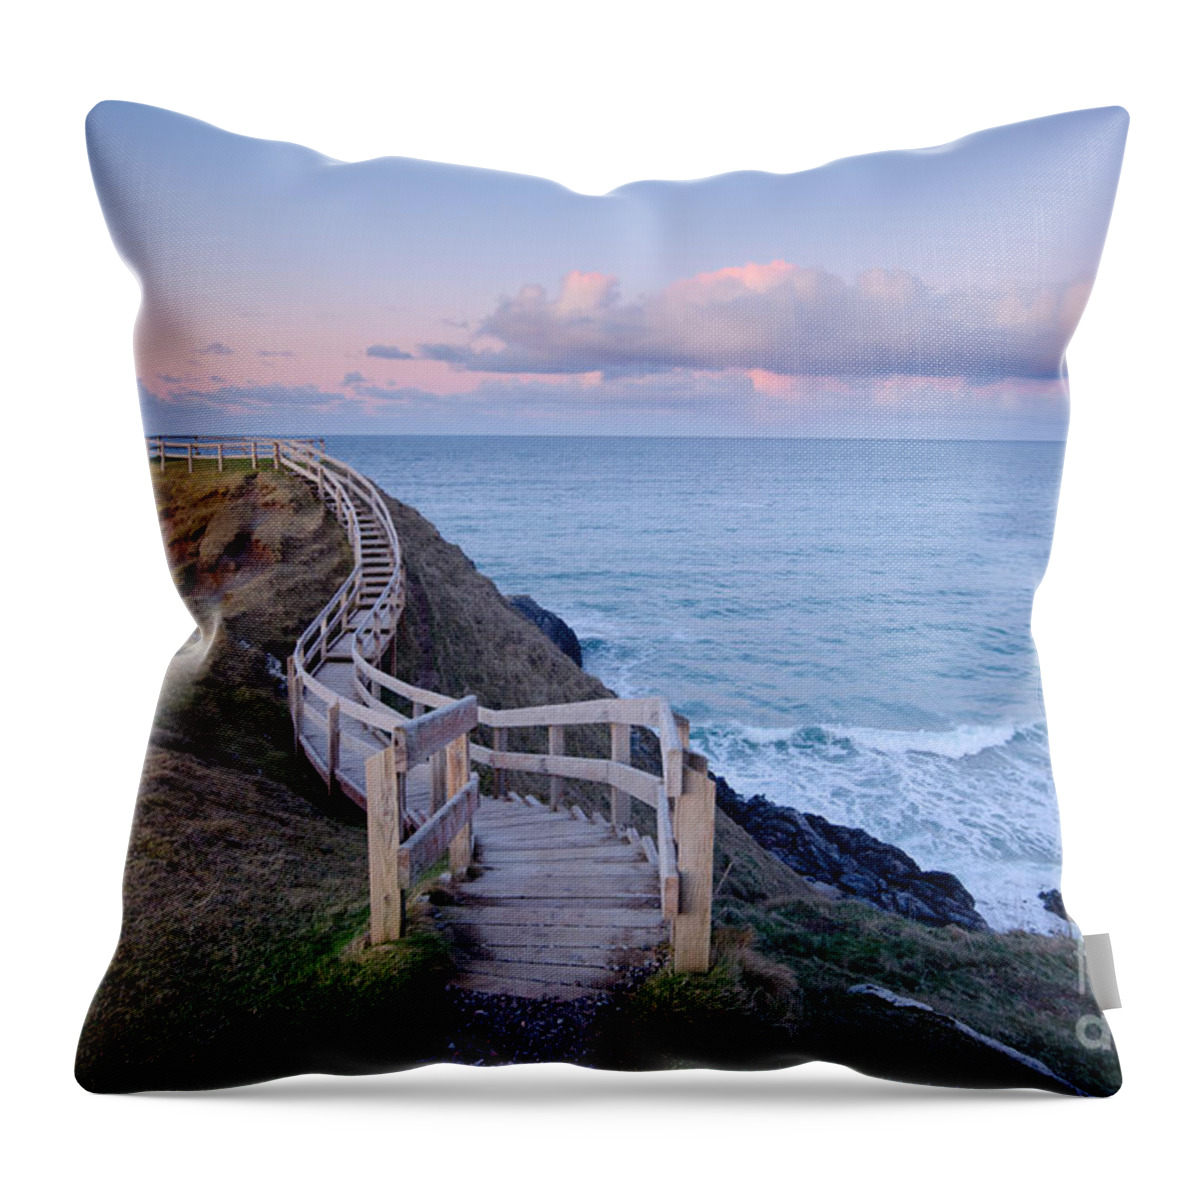 Durness Throw Pillow featuring the photograph Durness by Smart Aviation